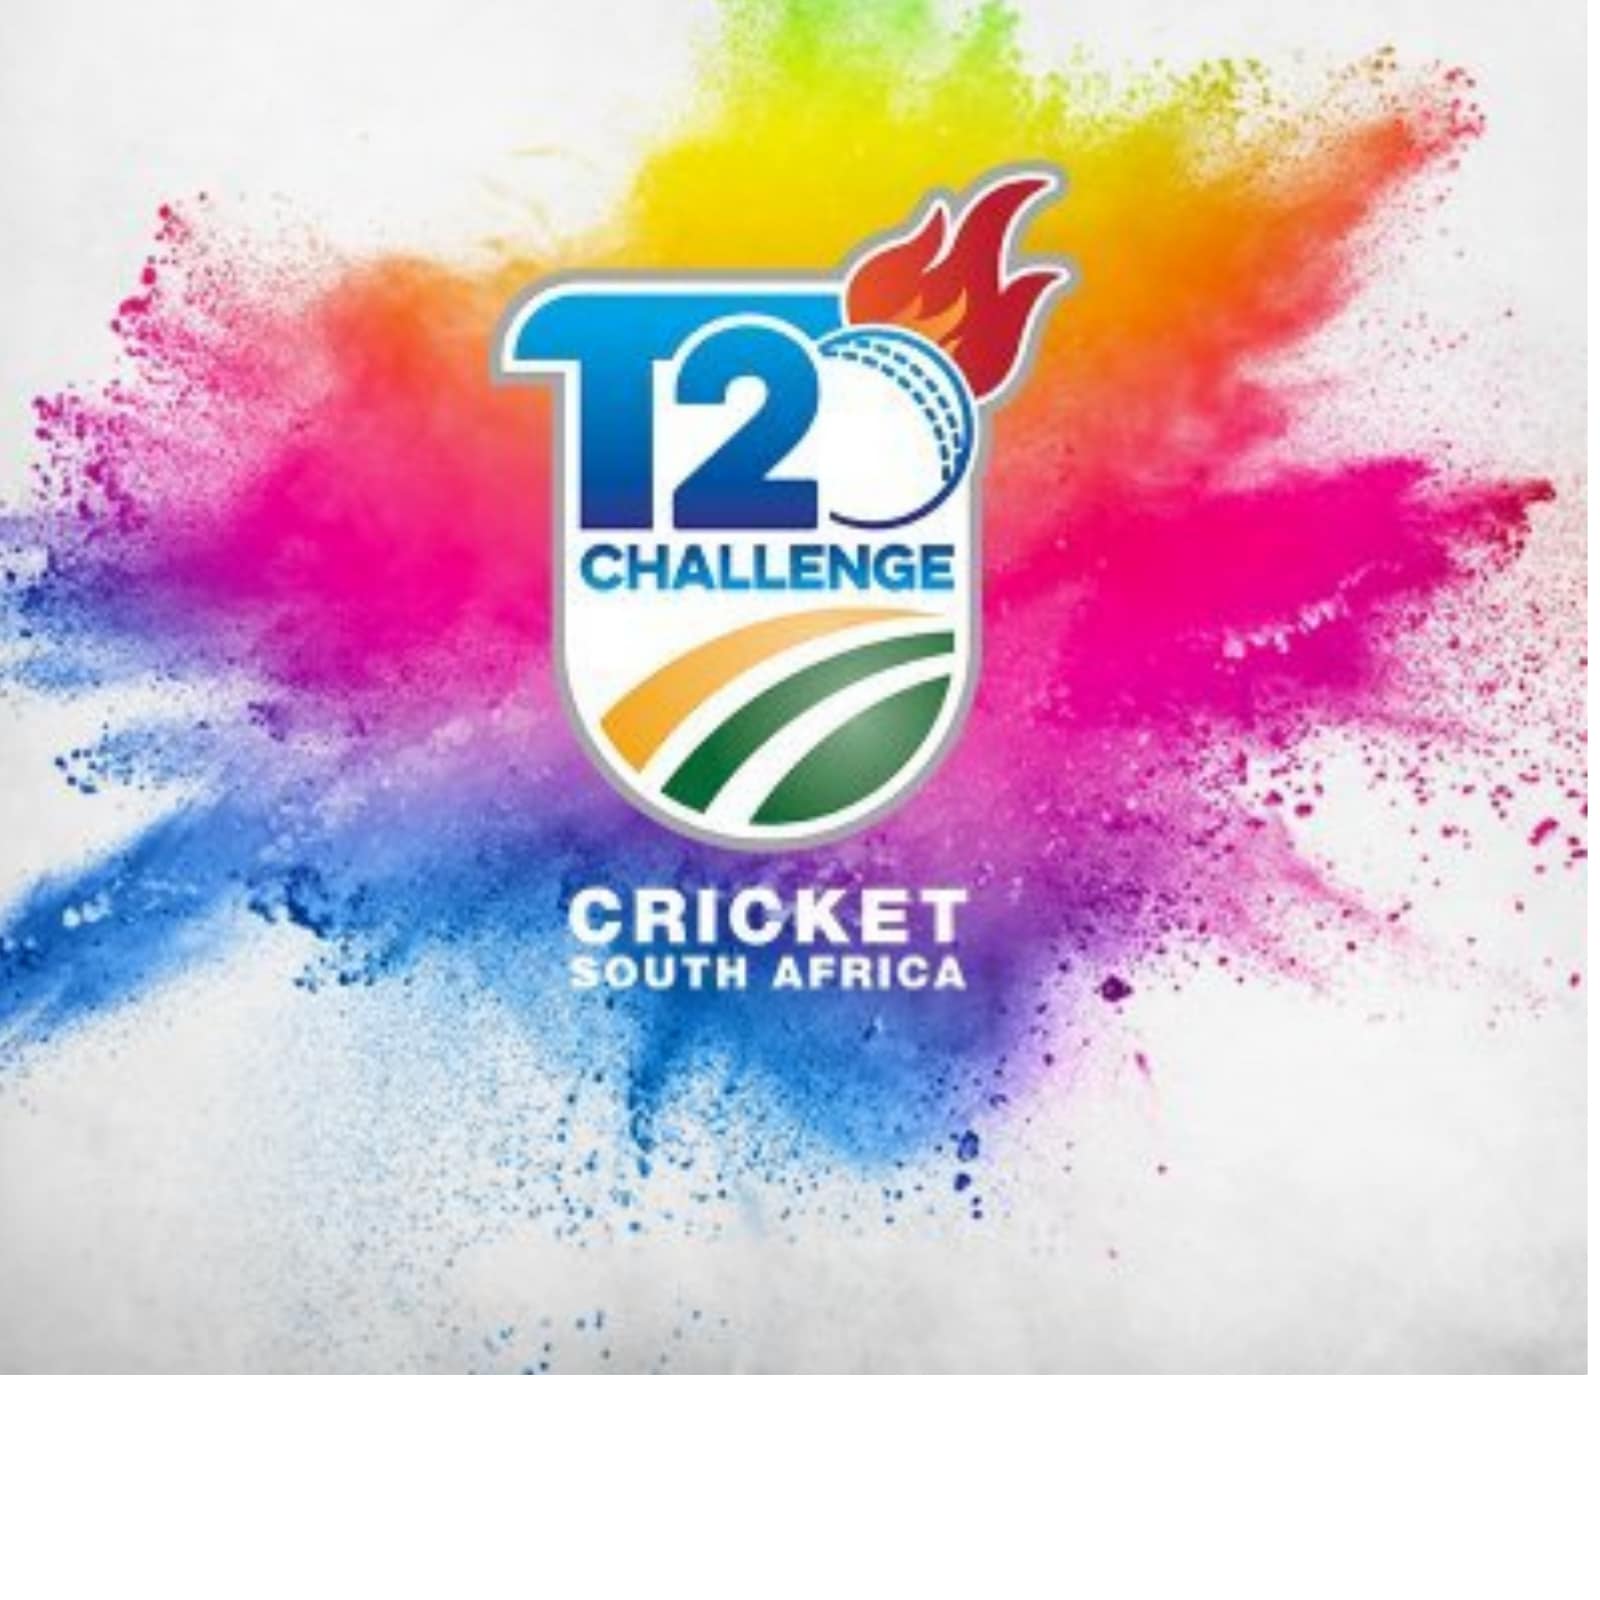 csa t20 live streaming